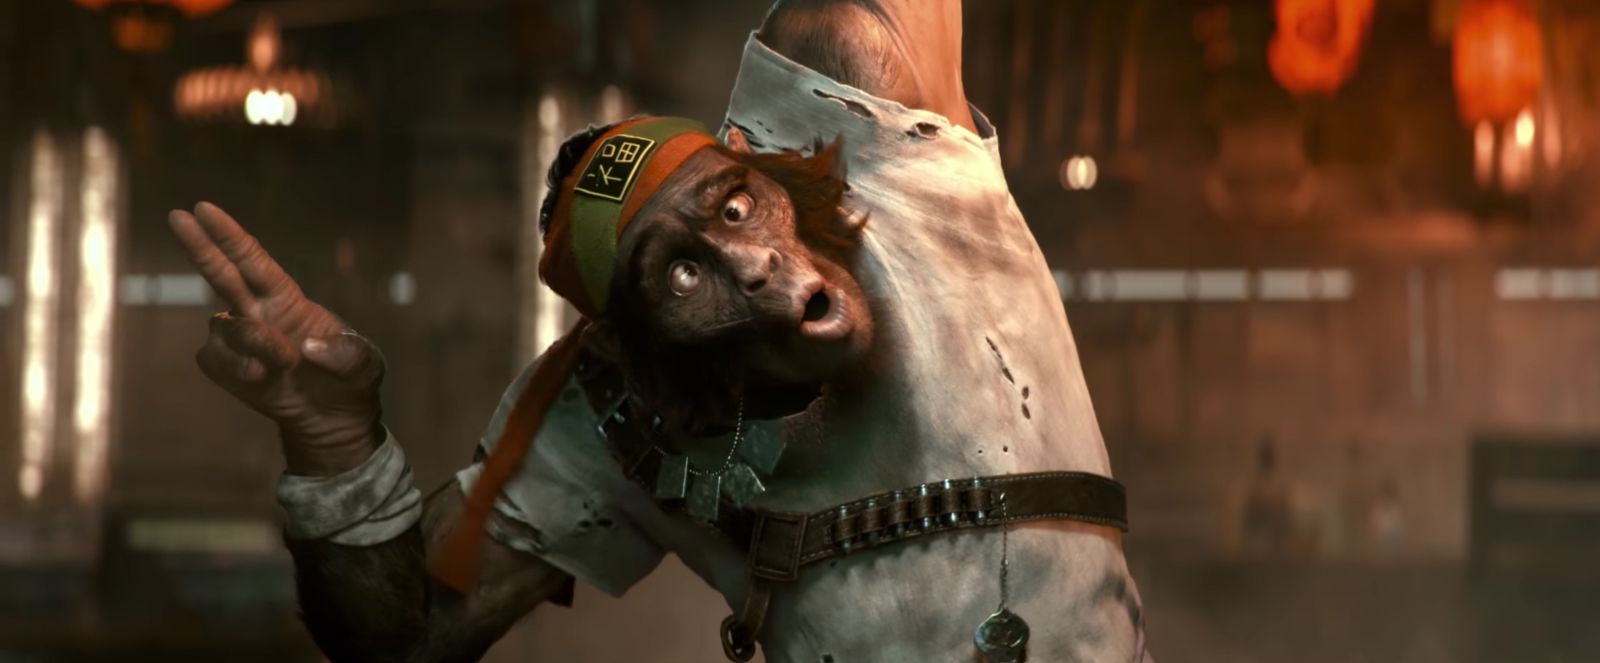 Image for Watch the first Beyond Good and Evil 2 development update livestream here